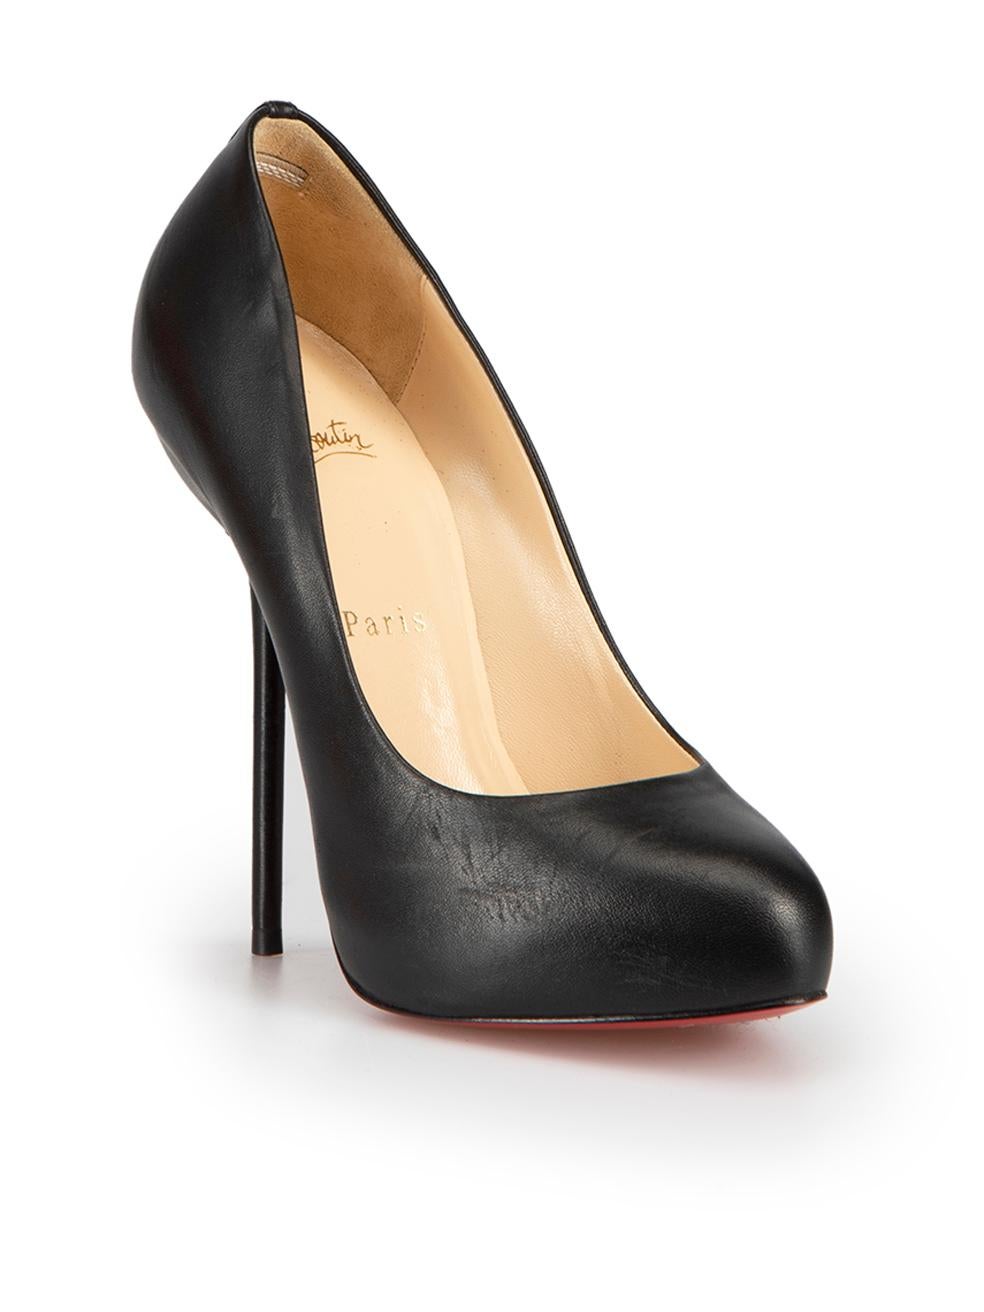 CONDITION is Never Worn. Visible wear to the front of the right shoe and rear-right of left shoe with faint scuffing due to poor storage on this used Christian Louboutin designer resale item.



Details


Black

Leather

Slip-on platform pumps

High